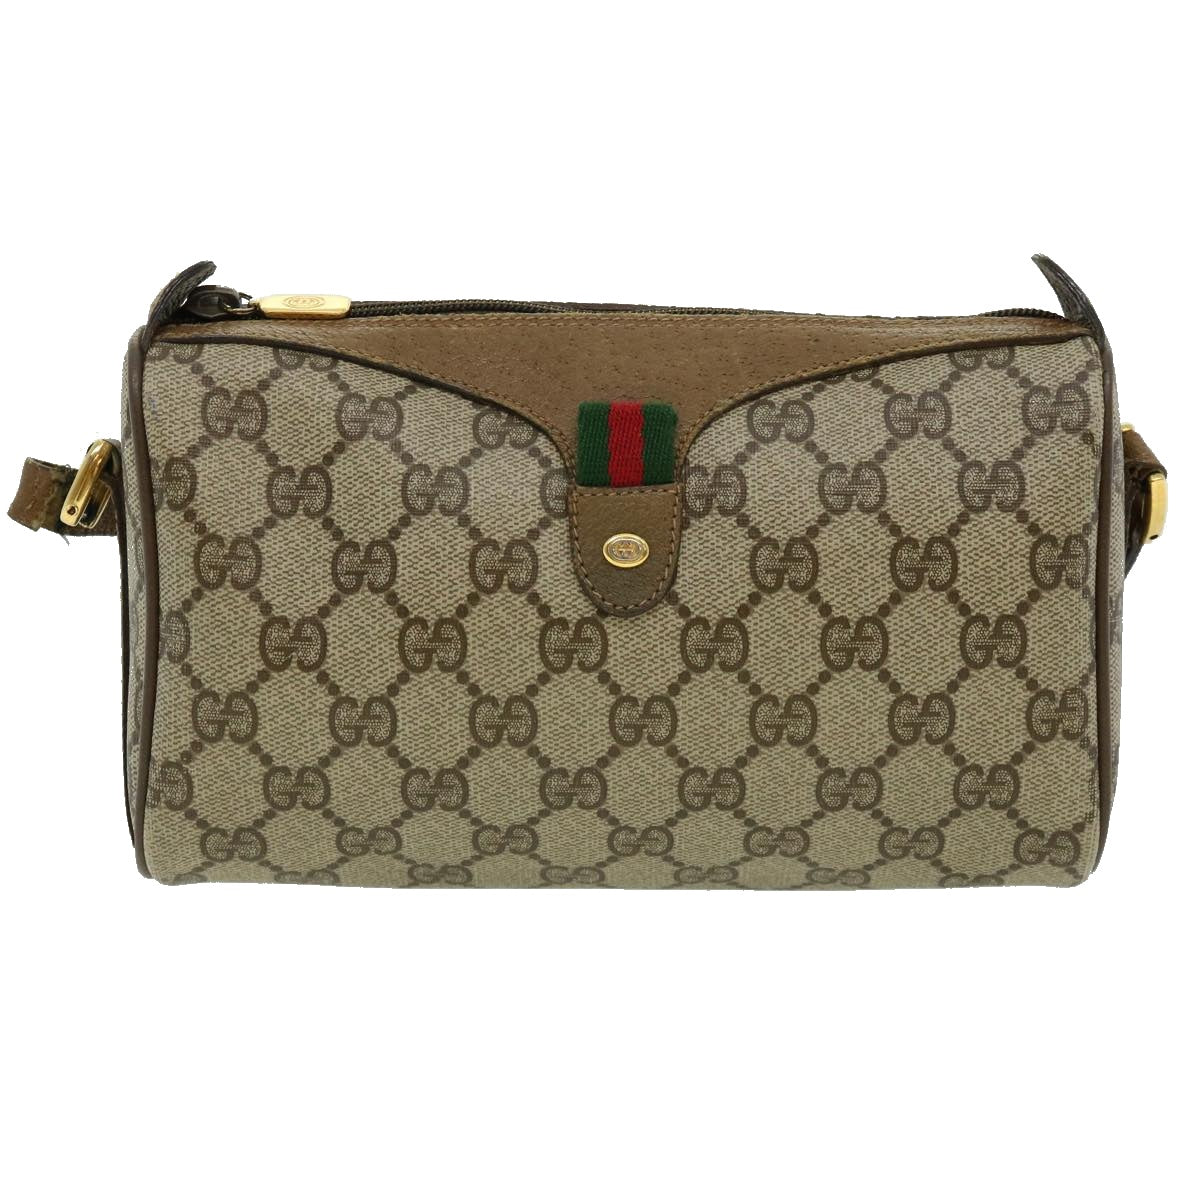 GUCCI GG Canvas Web Sherry Line Shoulder Bag Beige Red Green 8902018 Auth fm1530